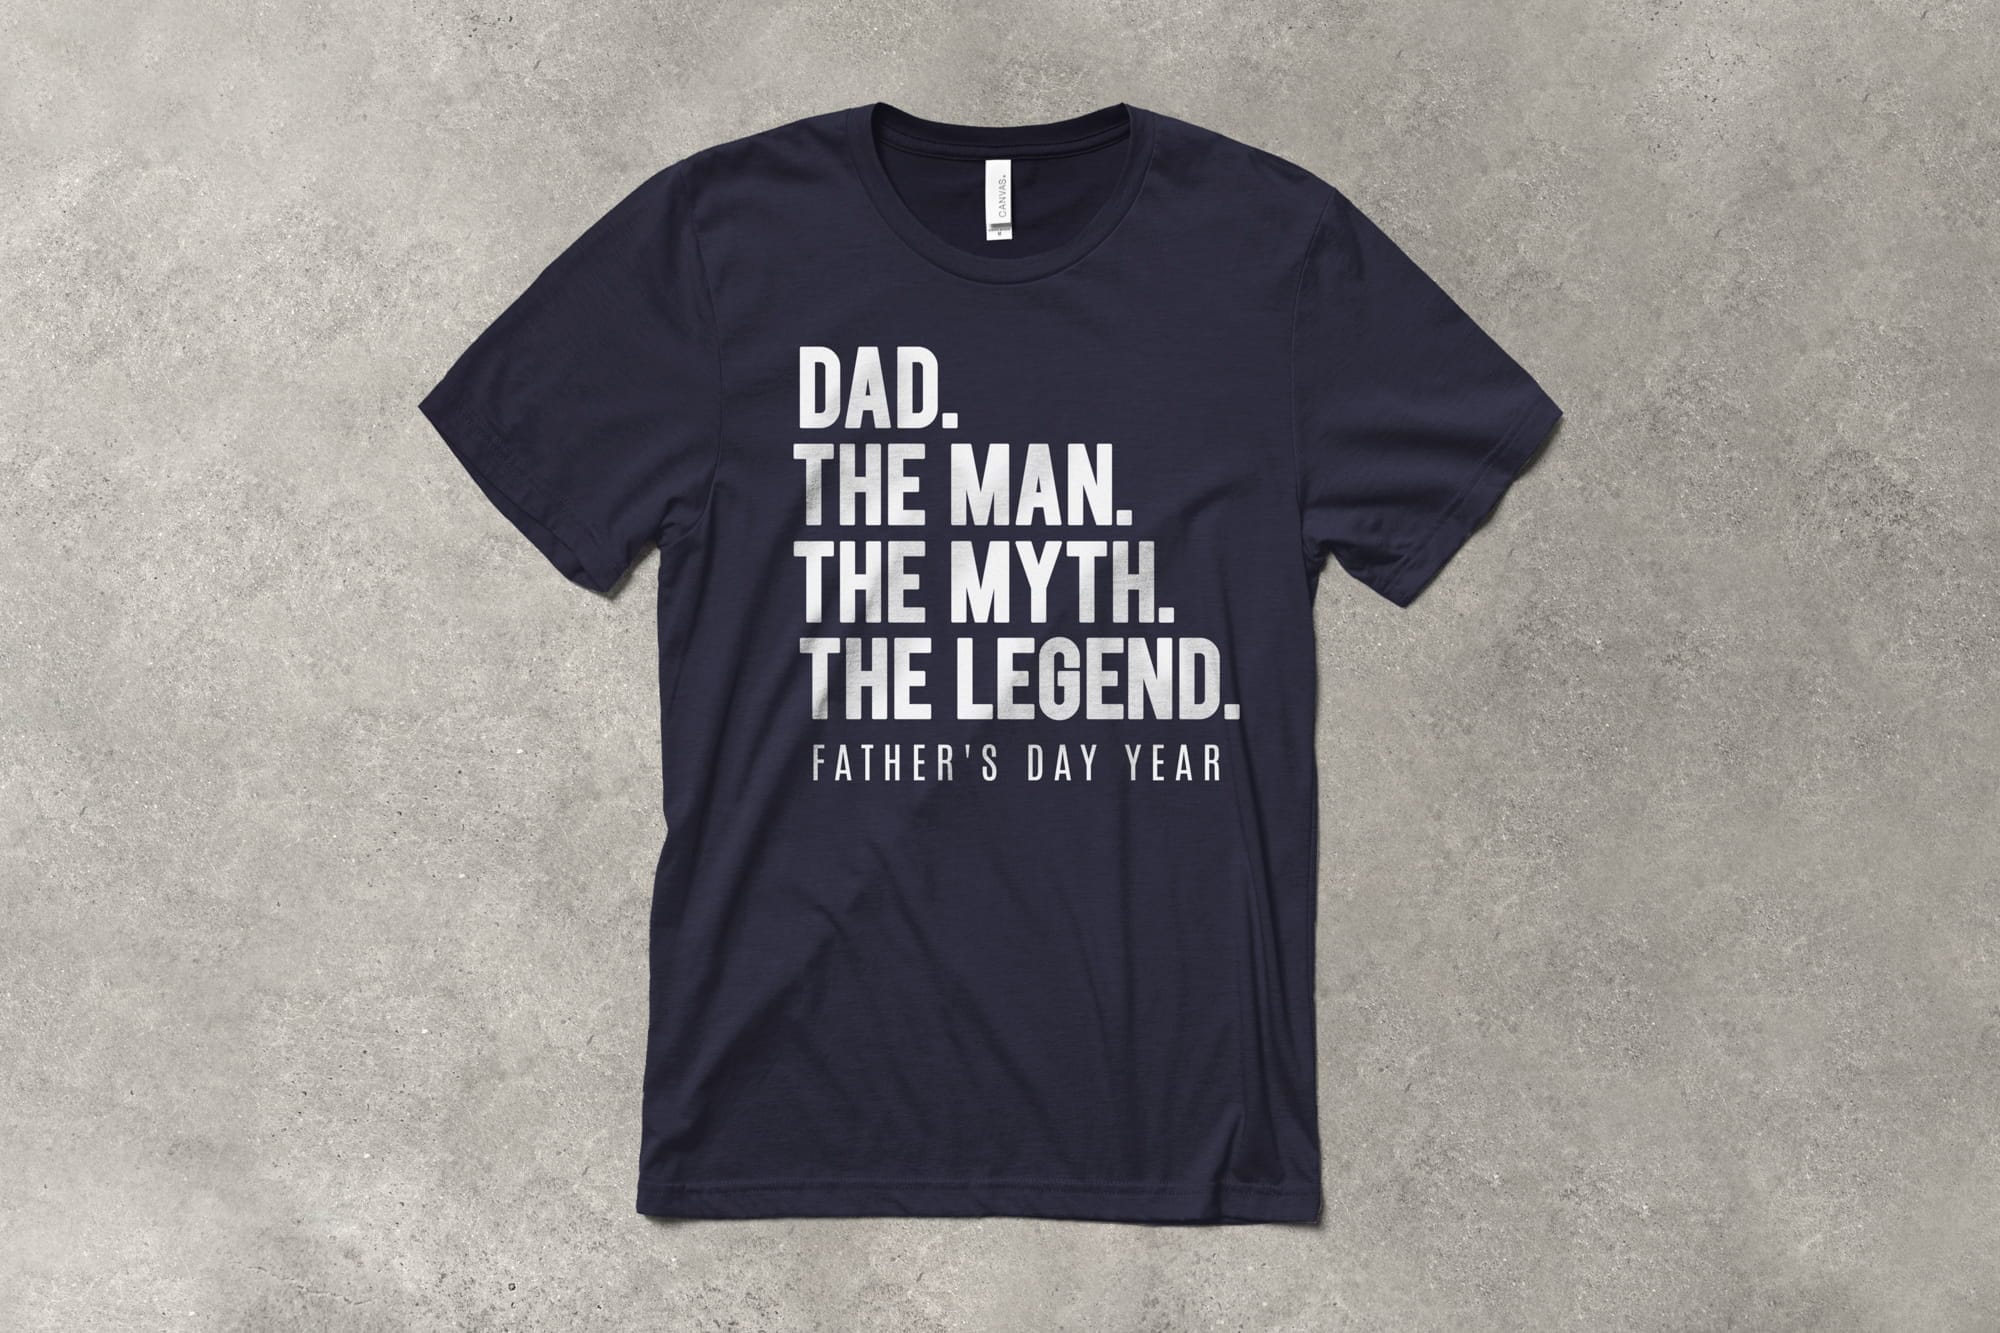 A flat t-shirt that has a customizable design that says "Dad. The man. The myth. The Legend."